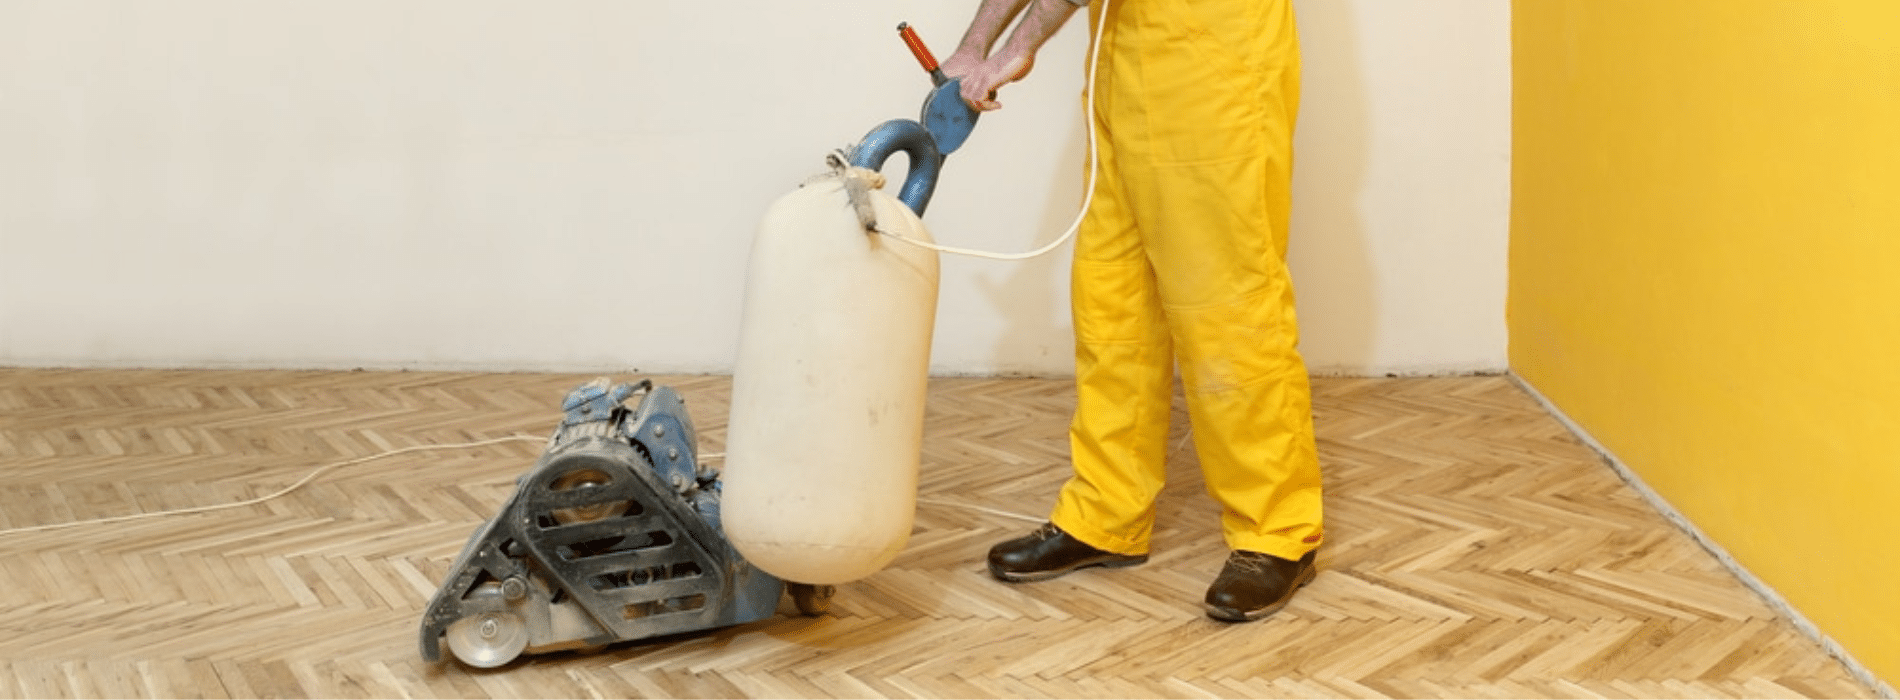 In Hainault, IG7, Skilled Mr Sander® using a powerful Bona drum sander (Dimension: 200 mm, Effect: 2,2 kW, Voltage: 240v) connected to a HEPA-filtered dust extraction system, expertly sand a herringbone floor.